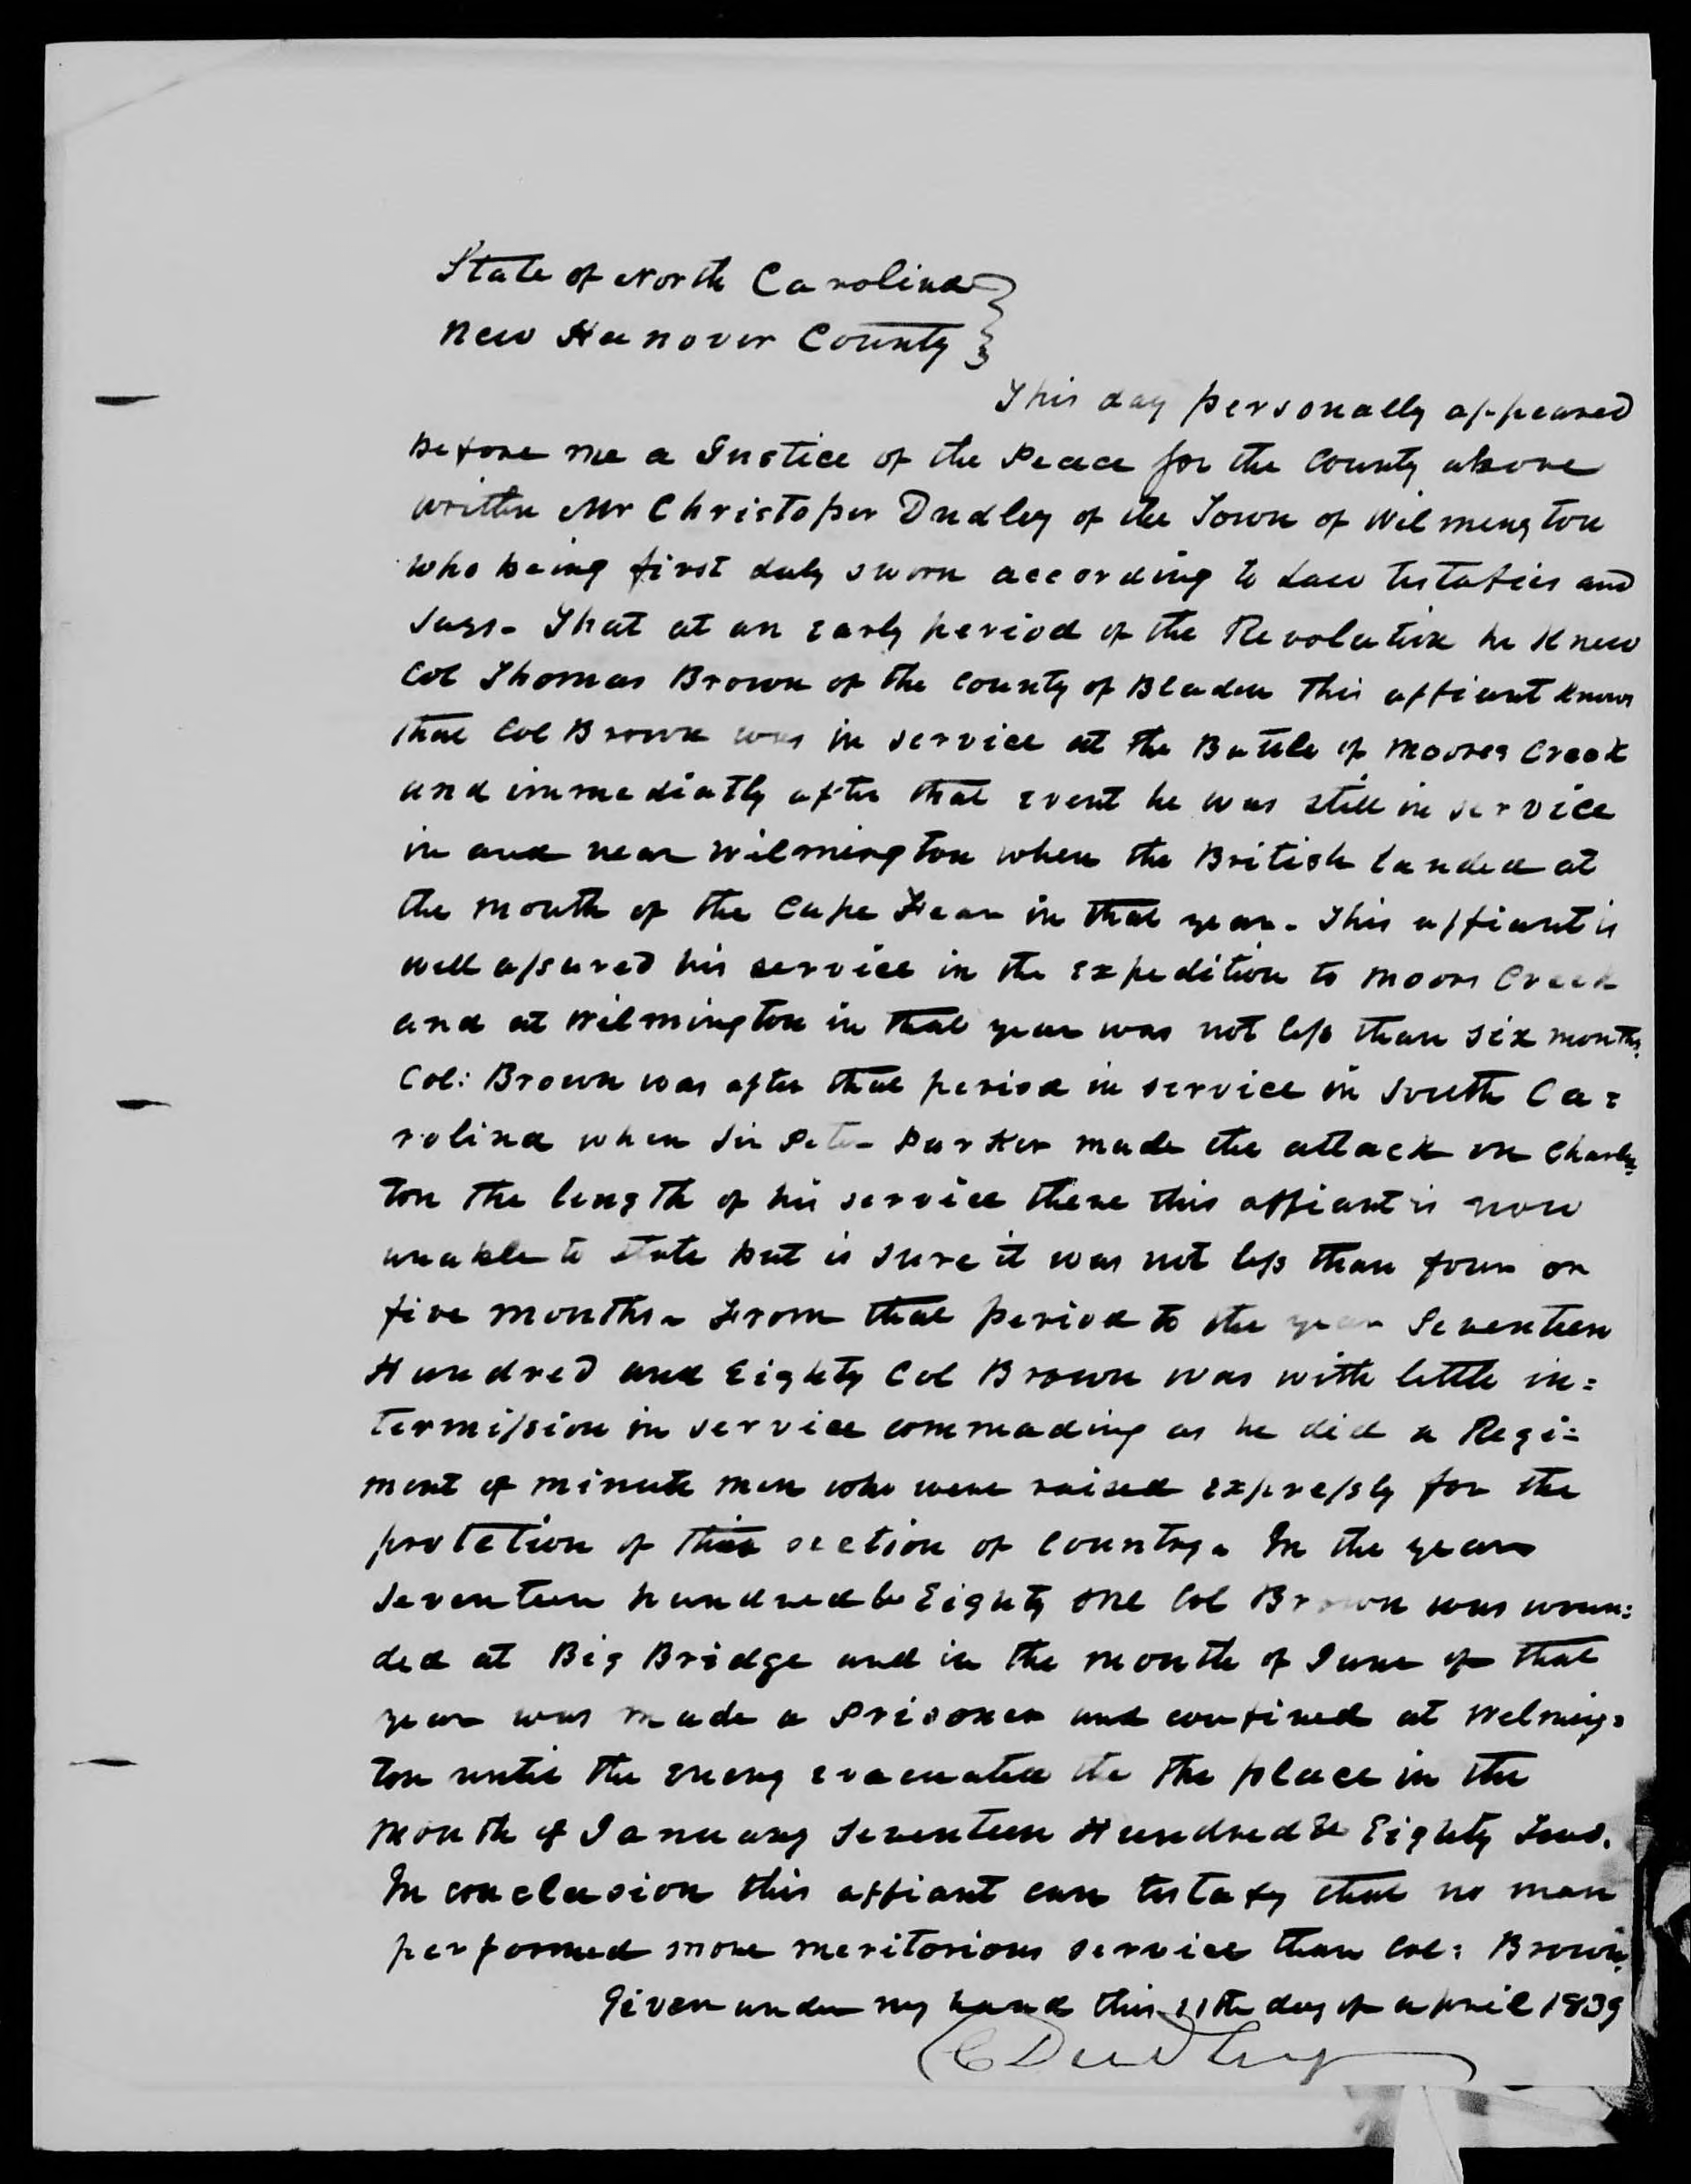 Affidavit of Christopher Dudley in support of a Pension Claim for Lucy Brown, 11 April 1839, page 1